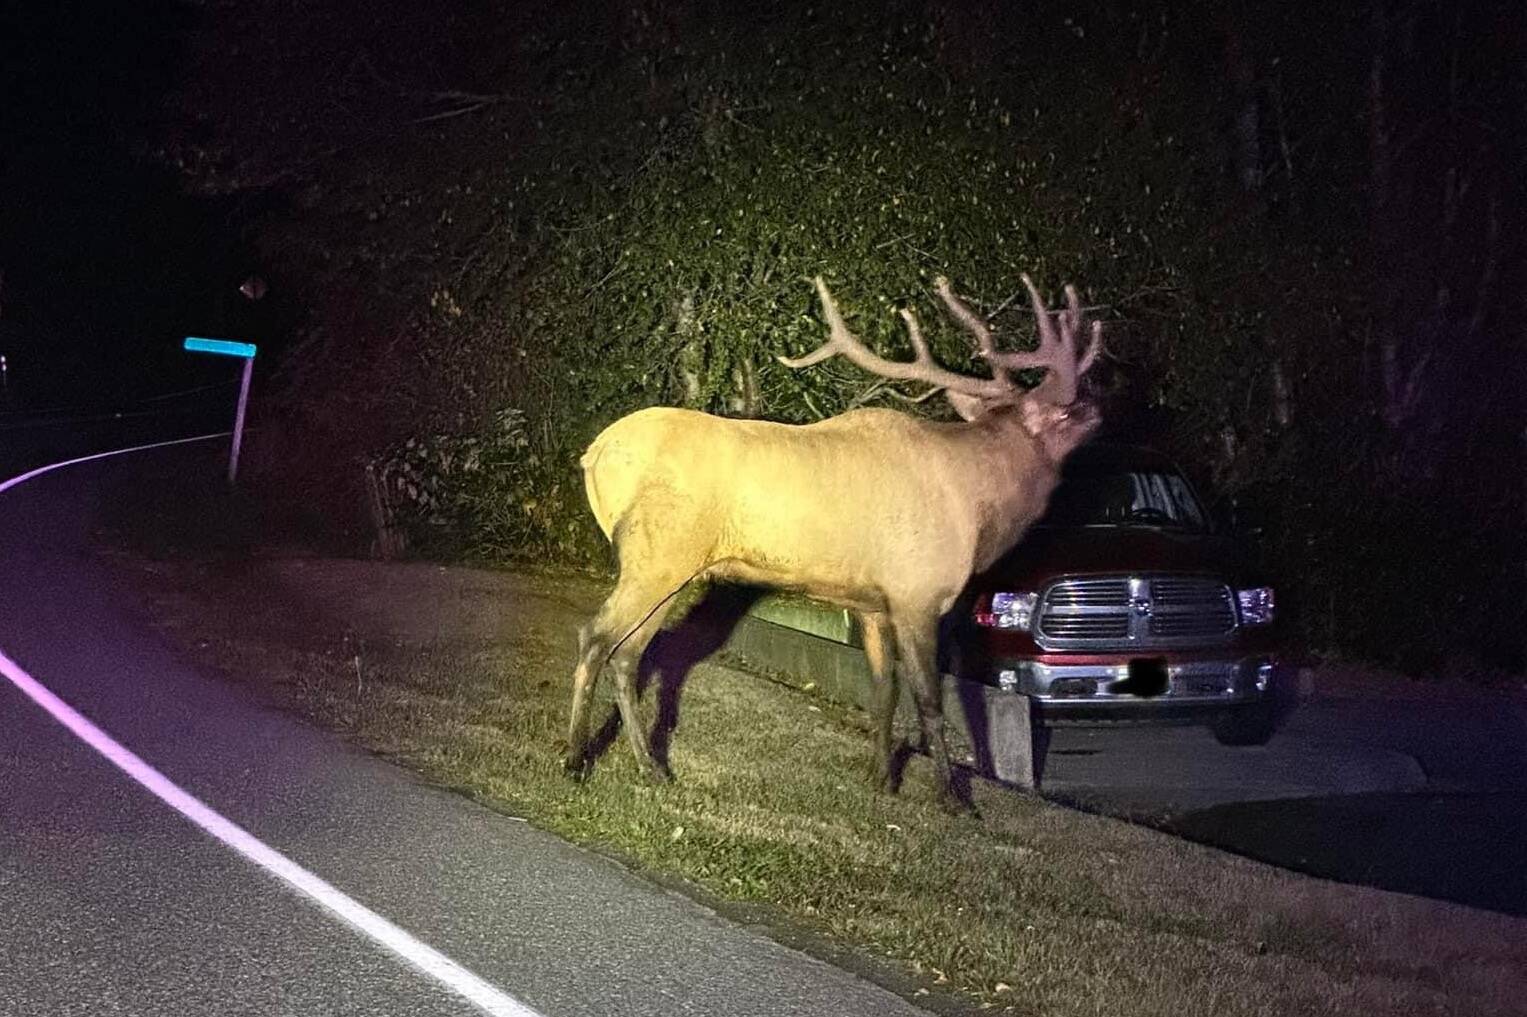 Island County Sheriff’s Office photo
Deputy Jon Woodfell snapped a photo of Bruiser while “assisting” him out of the roadway near Strawberry Point. The elk eventually and majestically disappeared into the woods.